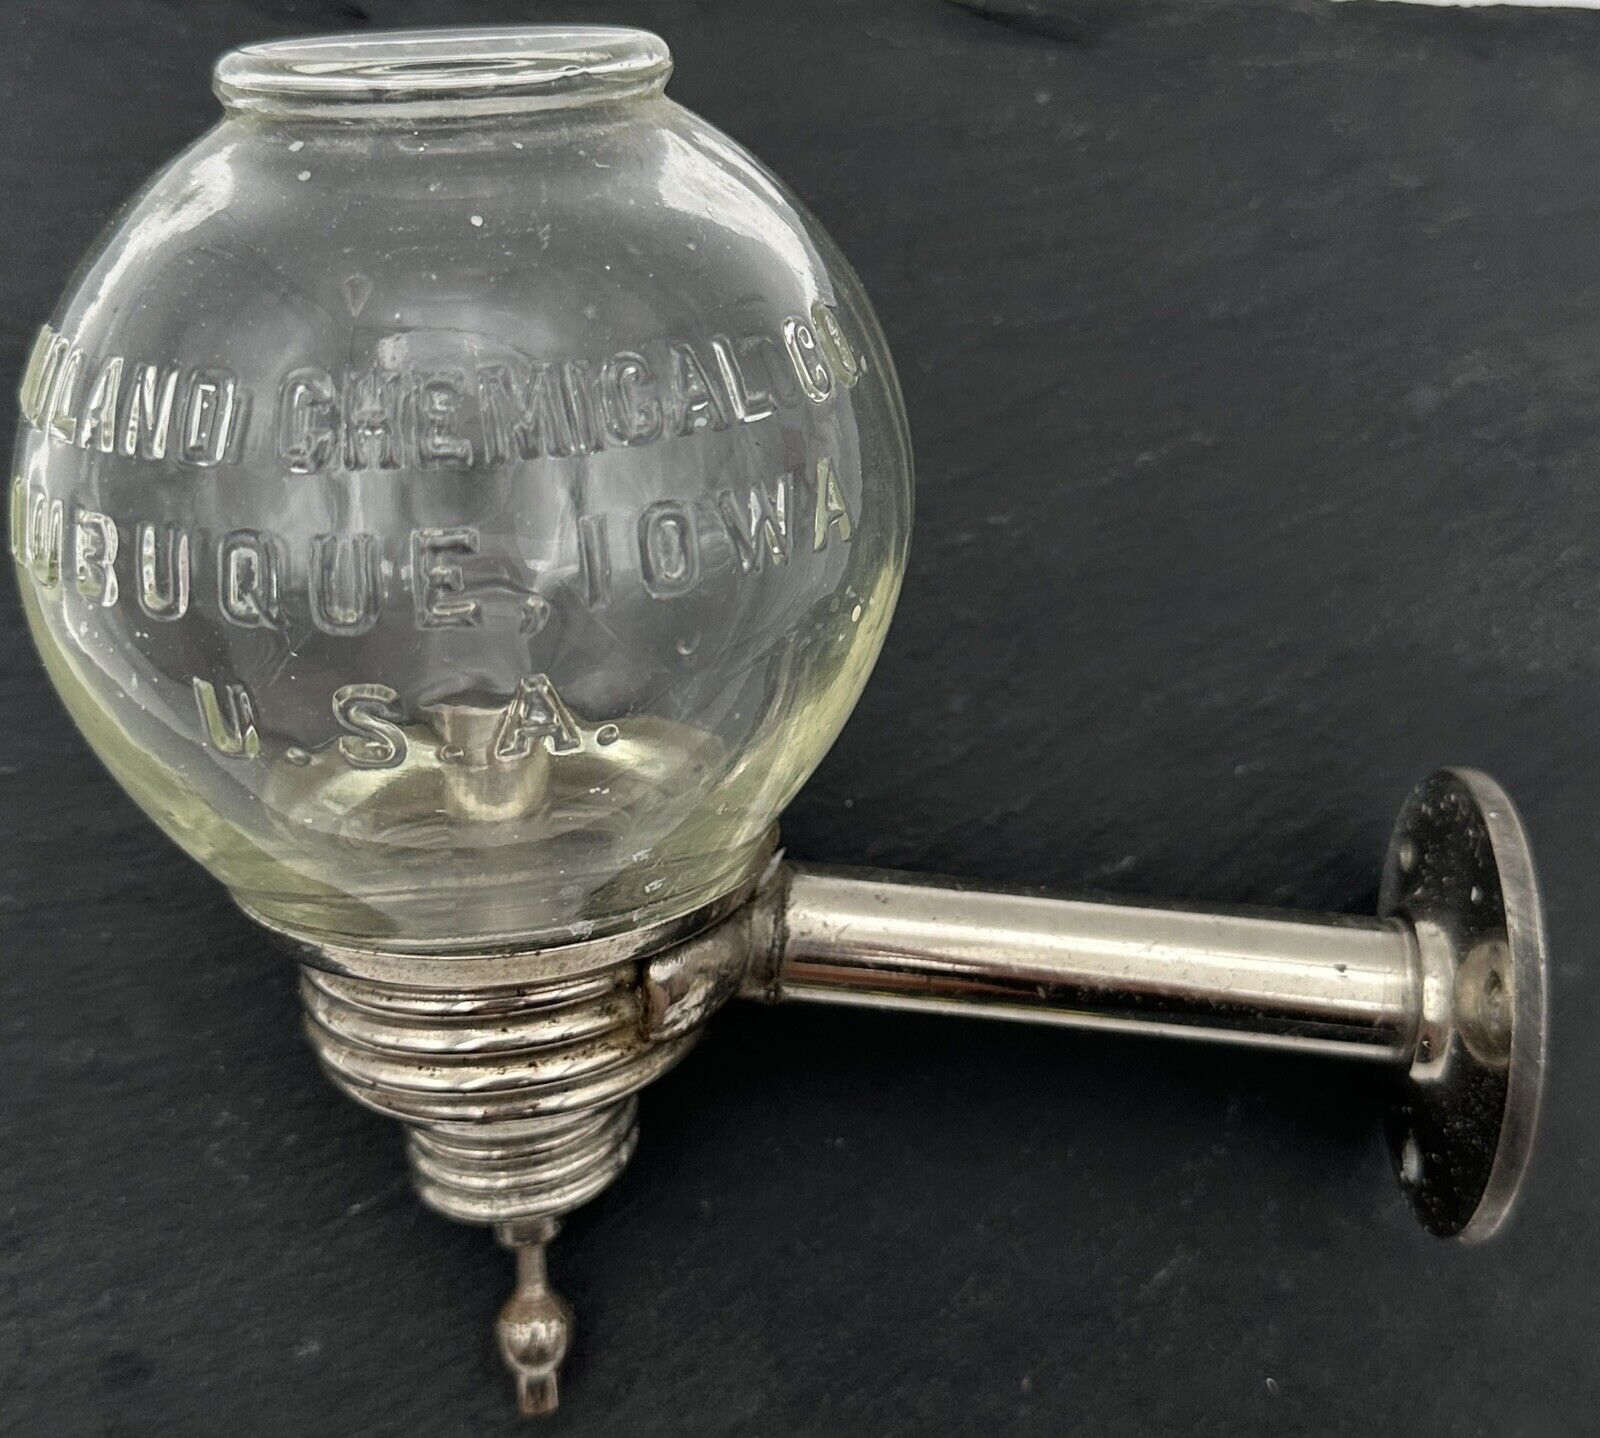 Antique Wall Mount Hand Soap Dispenser Midland Chemical Company Dubuque Iowa